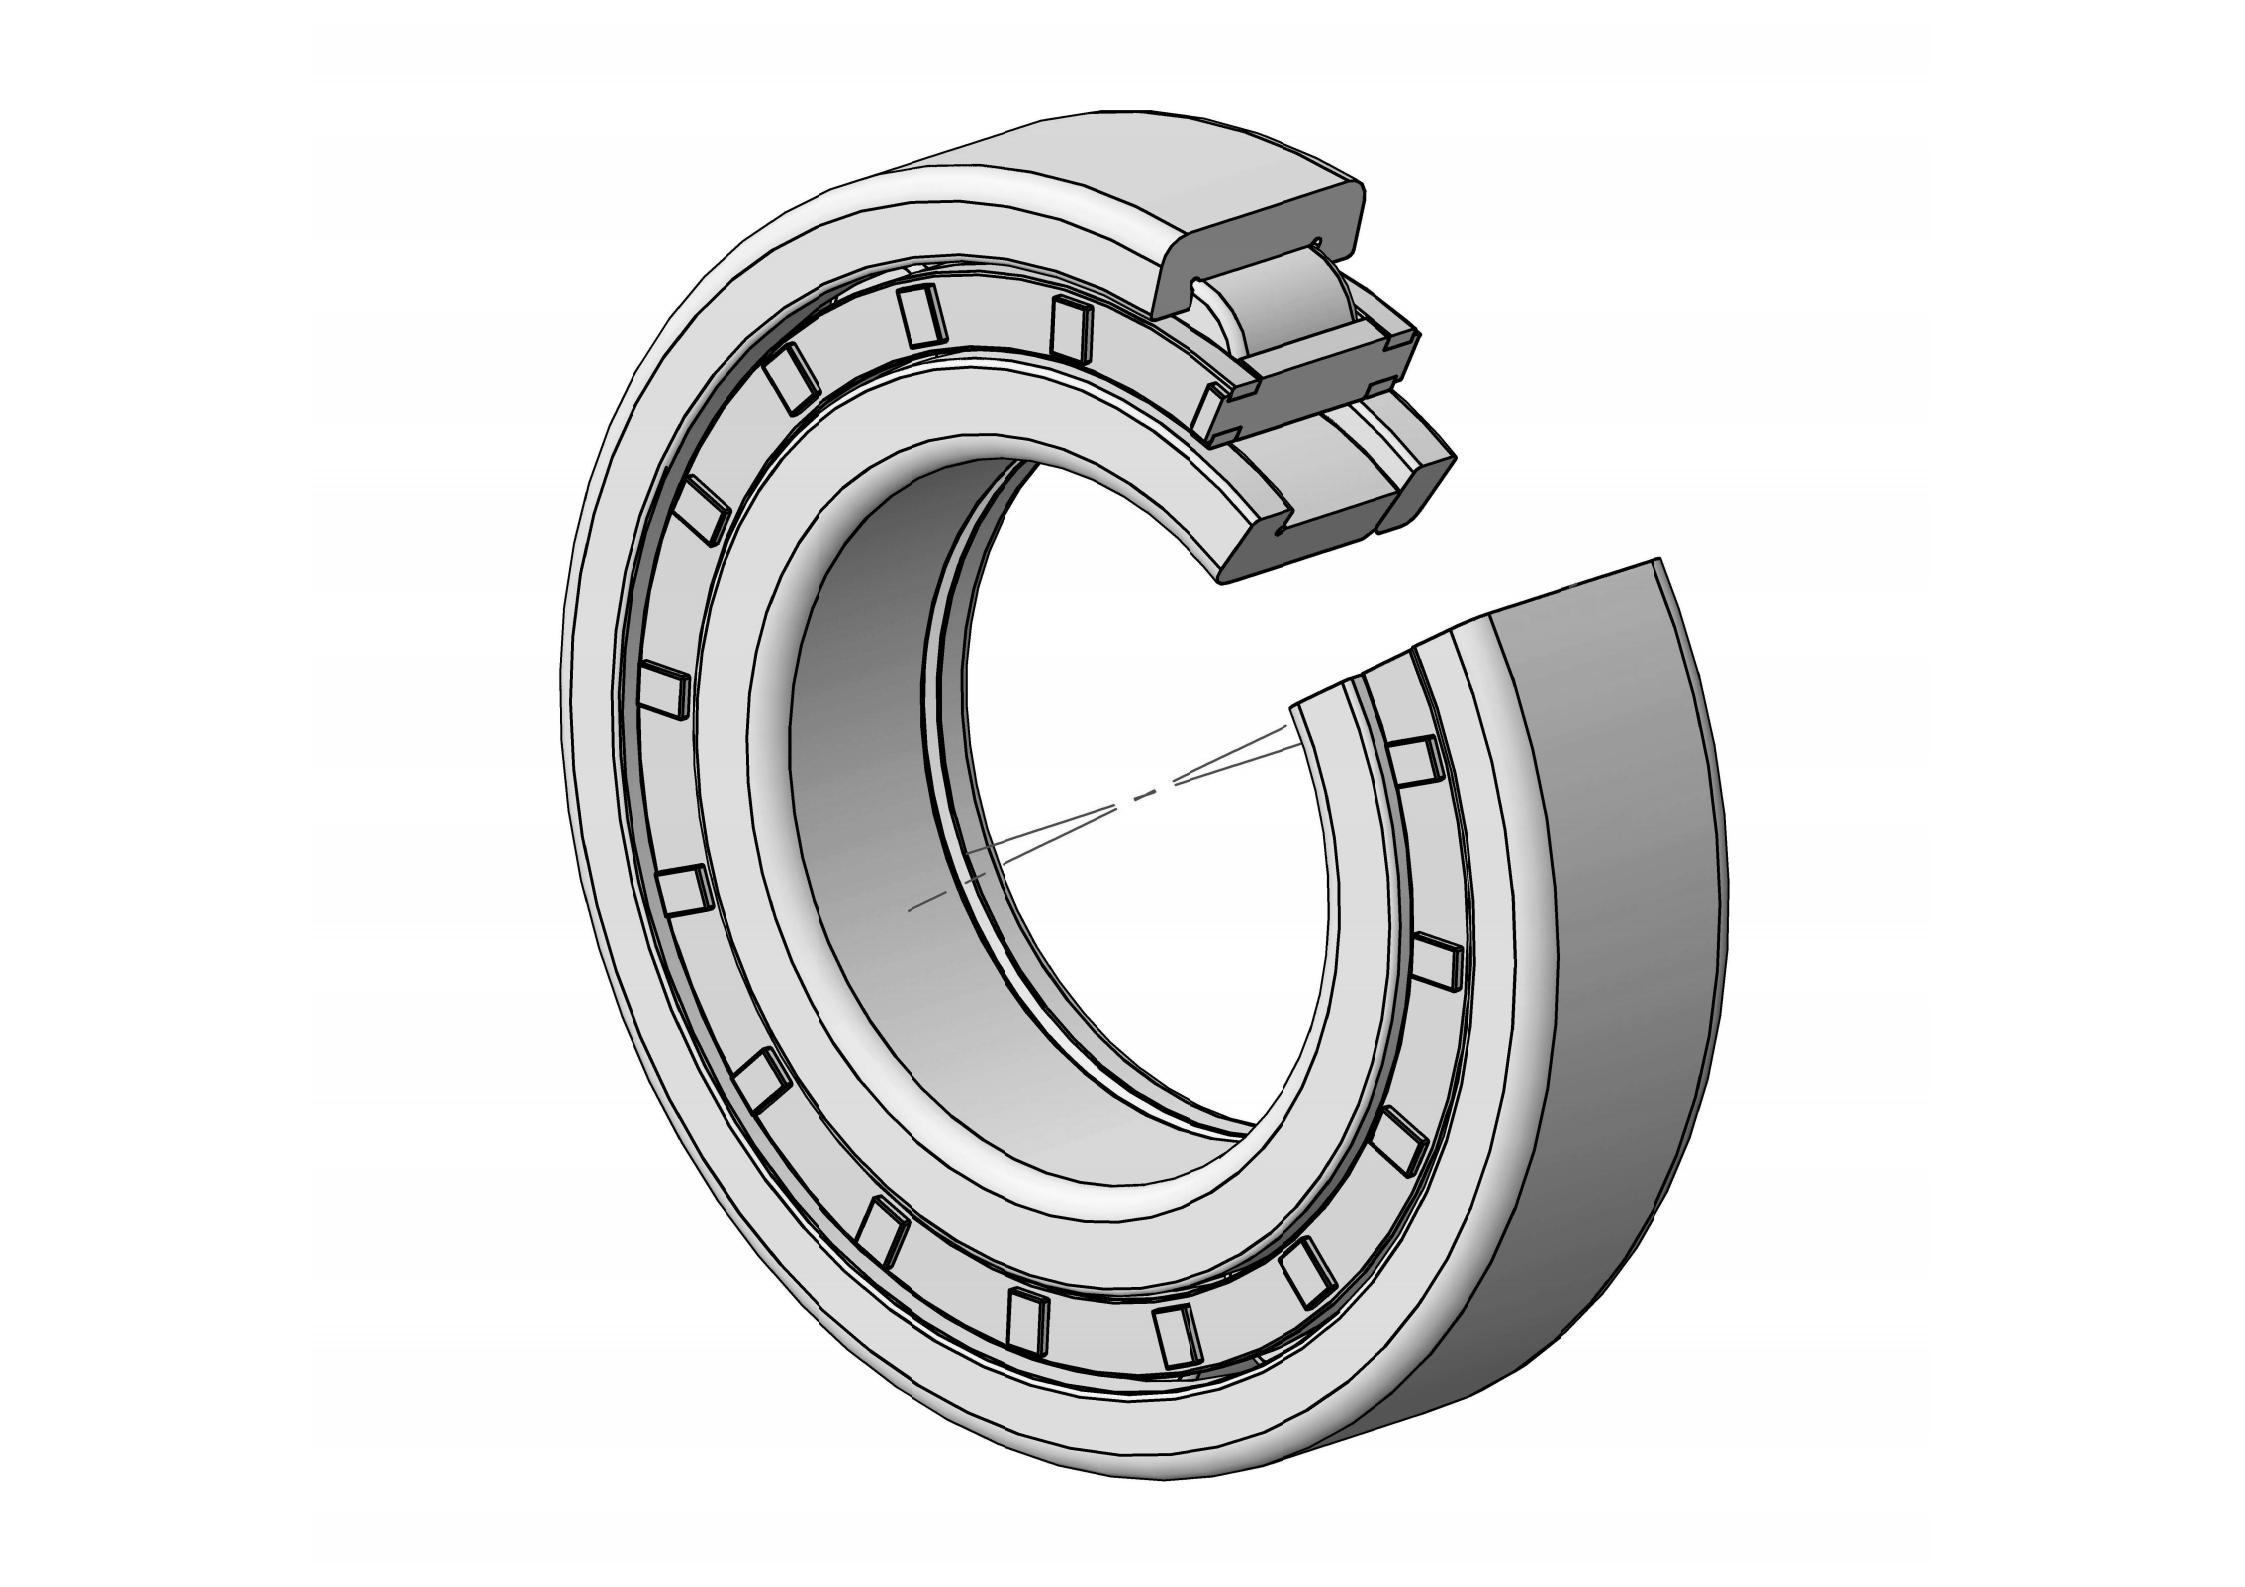 NUP2307-E Single Row Cylindrical roller bearing 